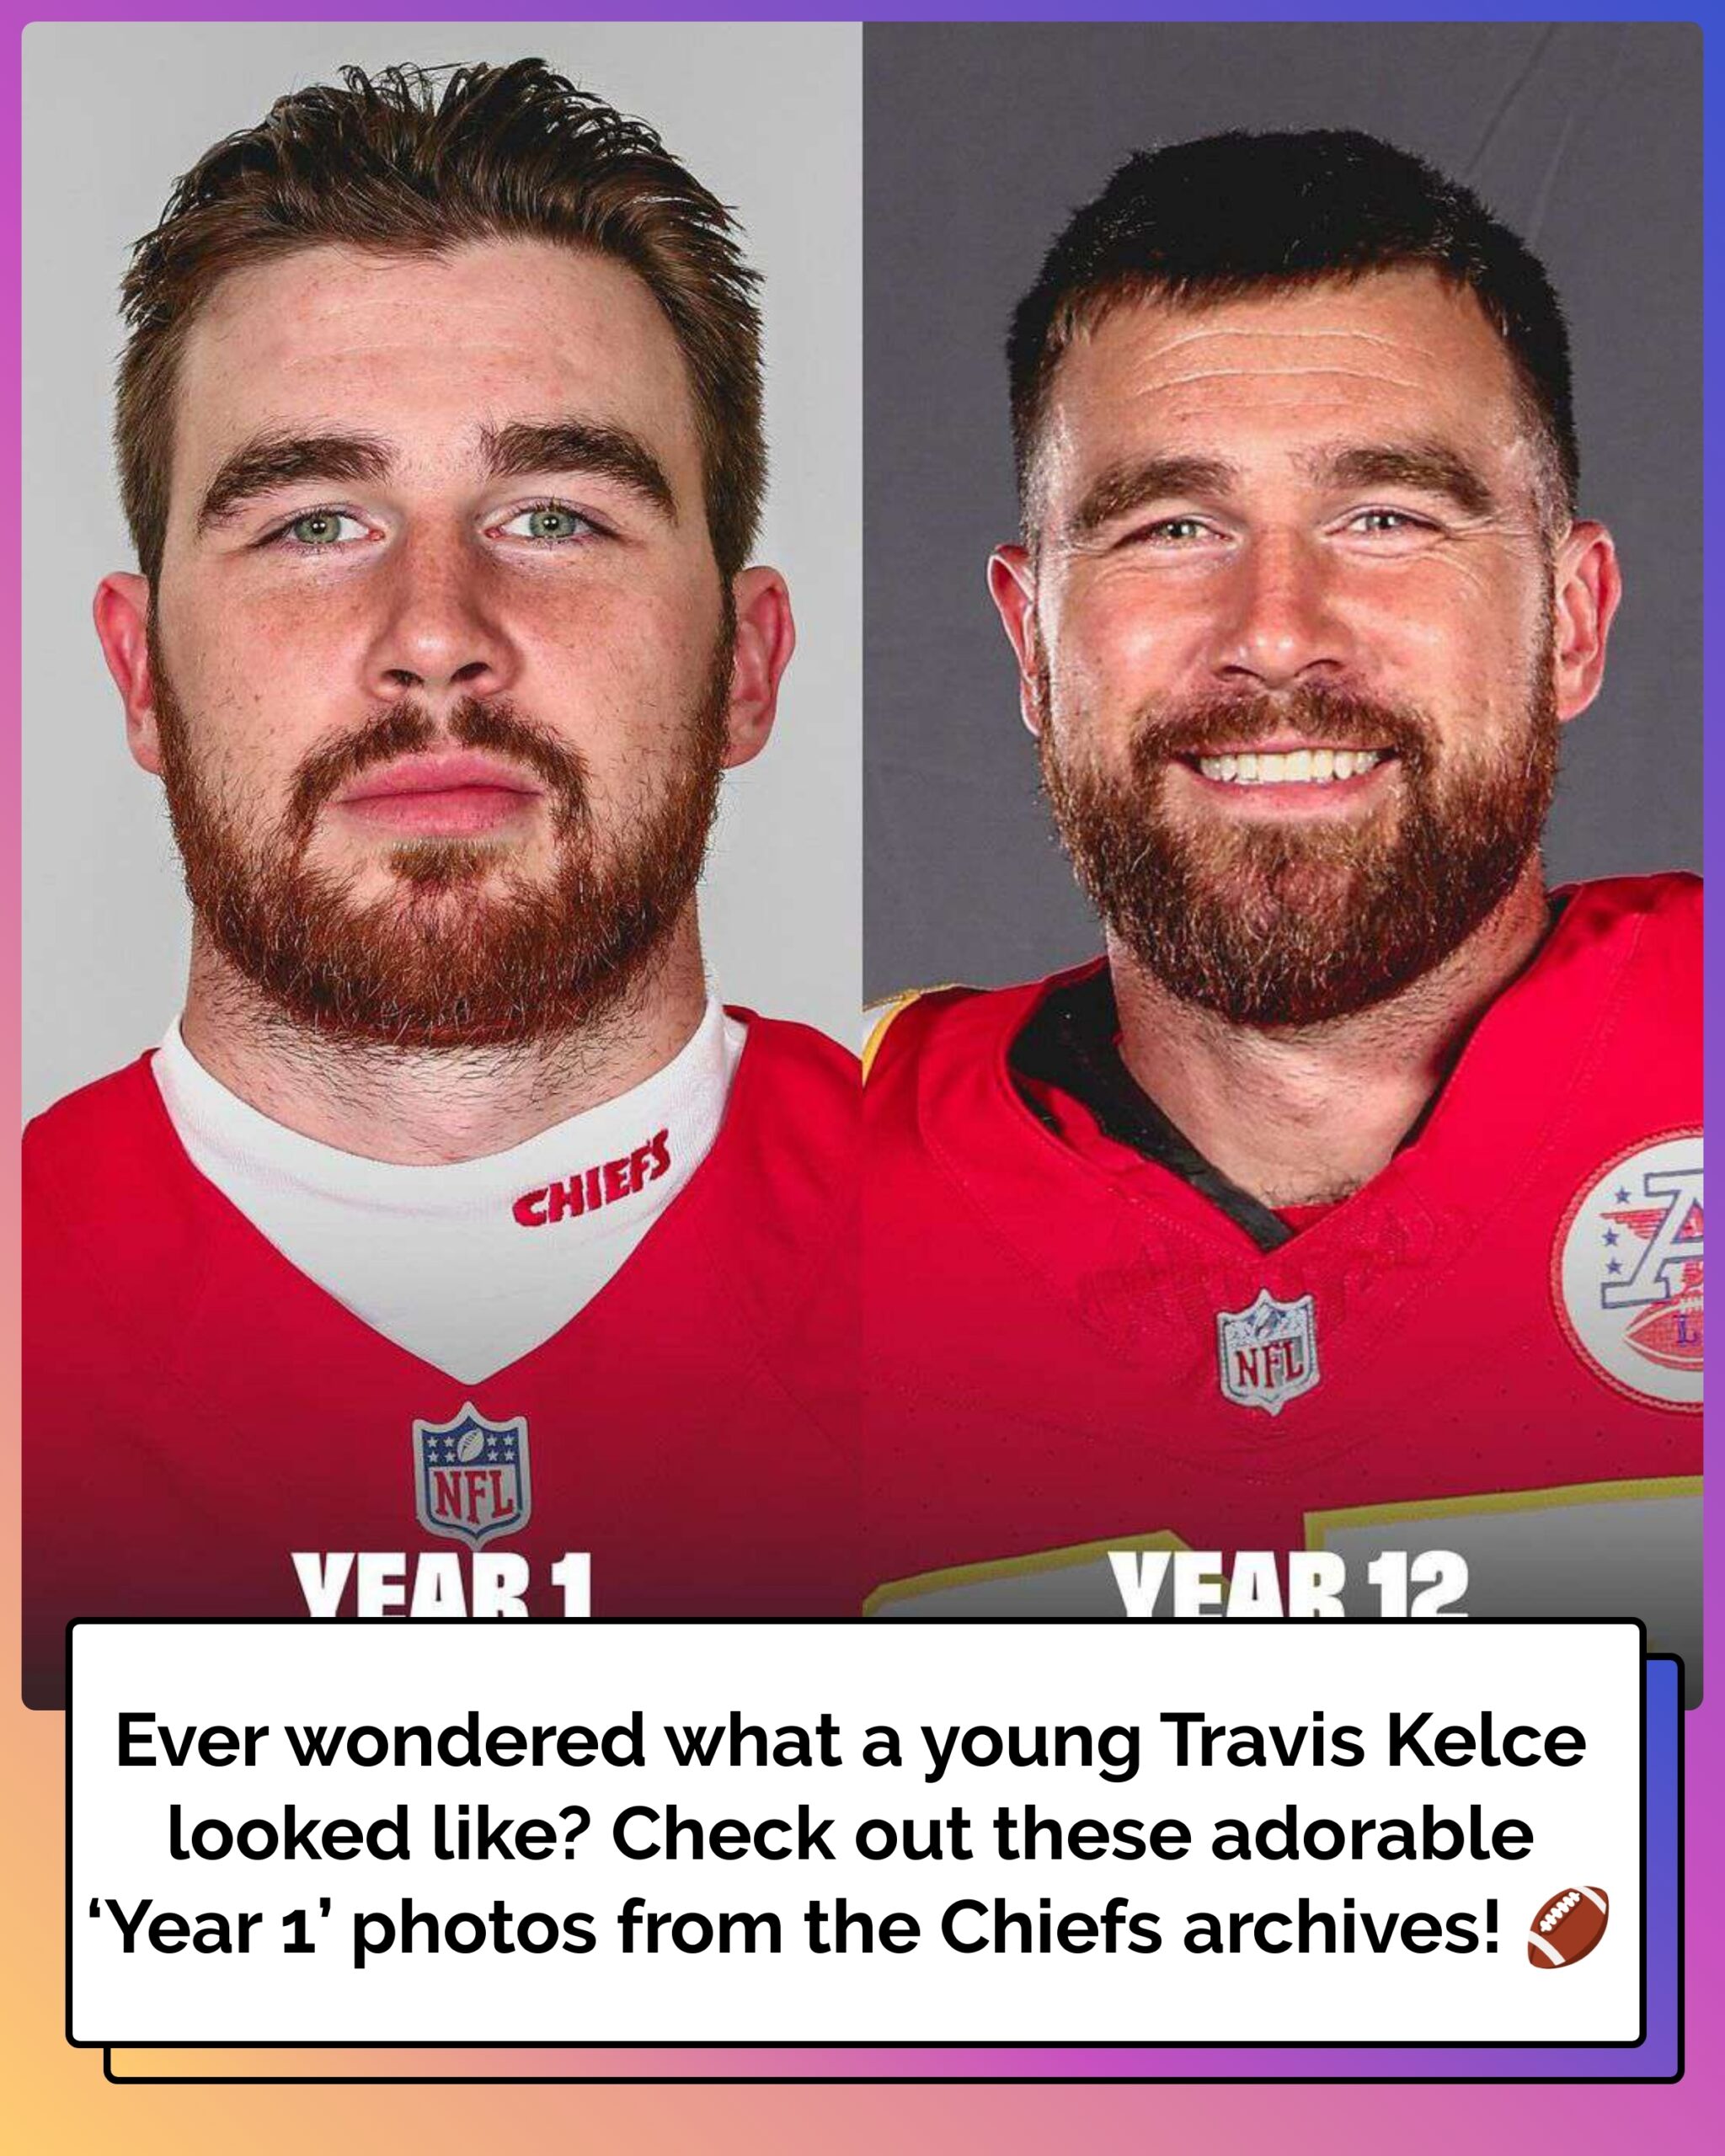 Travis Kelce Looks Fresh Faced in ‘Year 1’ Photo Shared from Kansas City Chiefs ‘Archives’